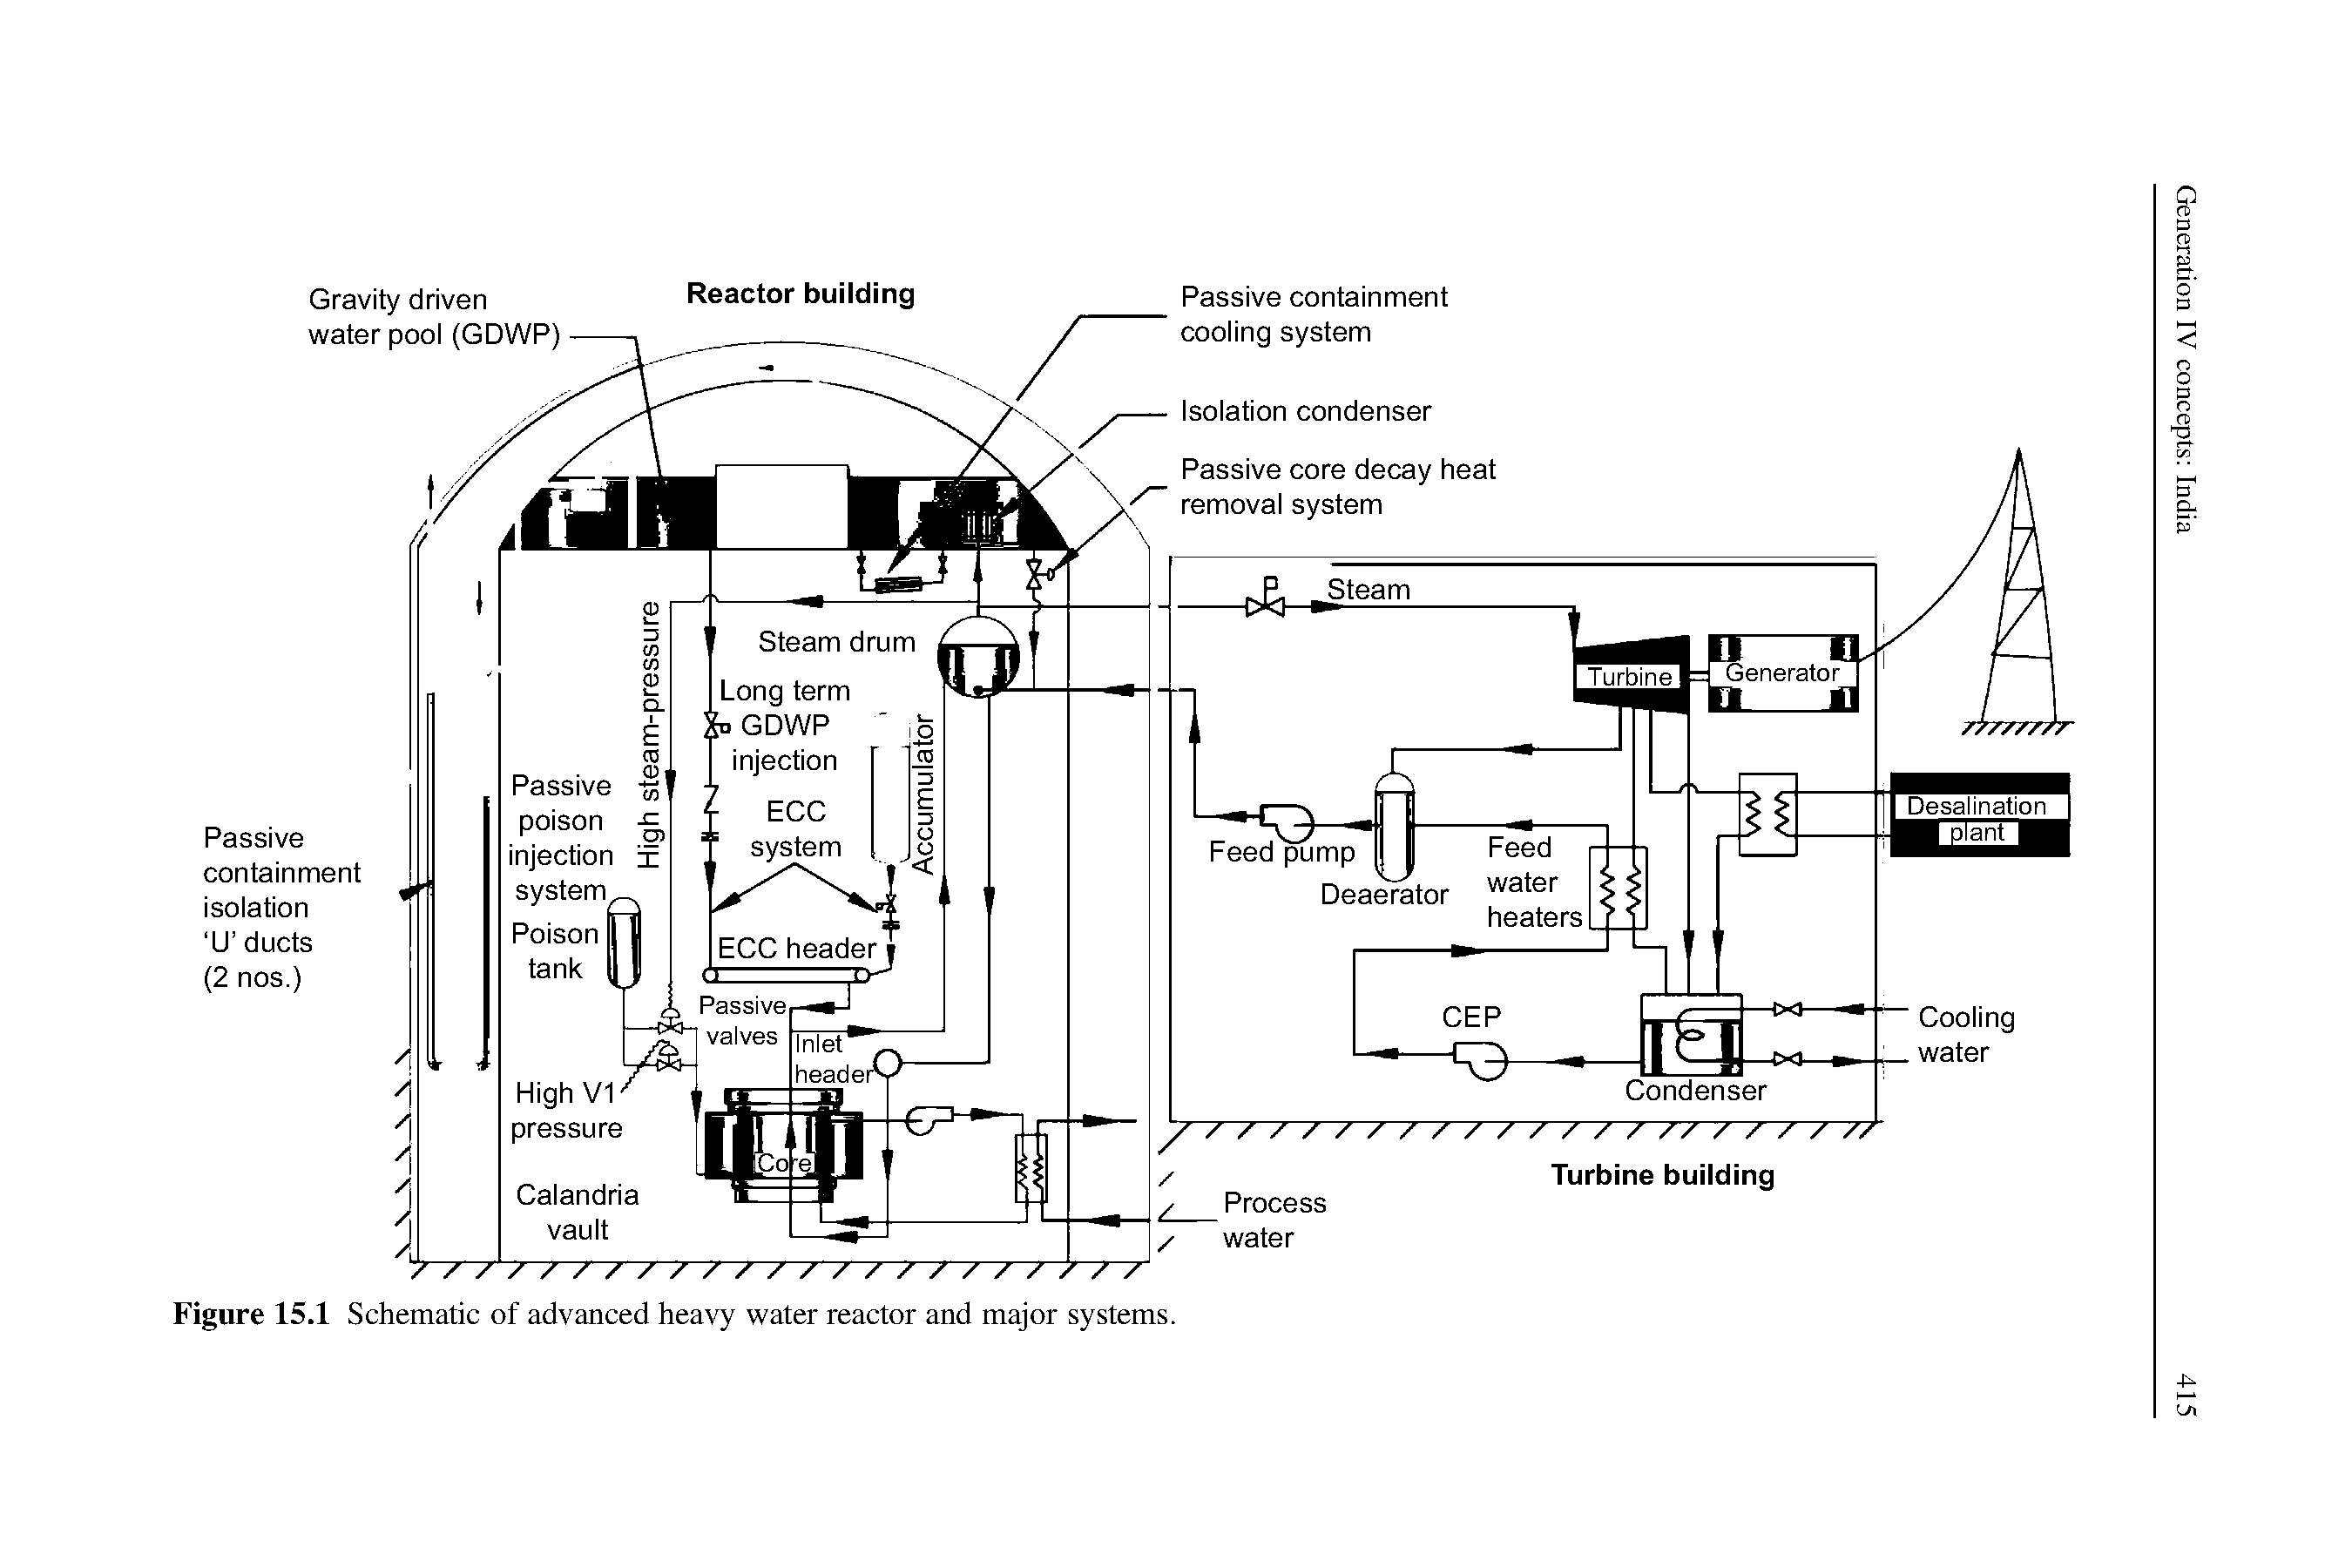 Figure 15.1 Schematic of advanced heavy water reactor and major systems.